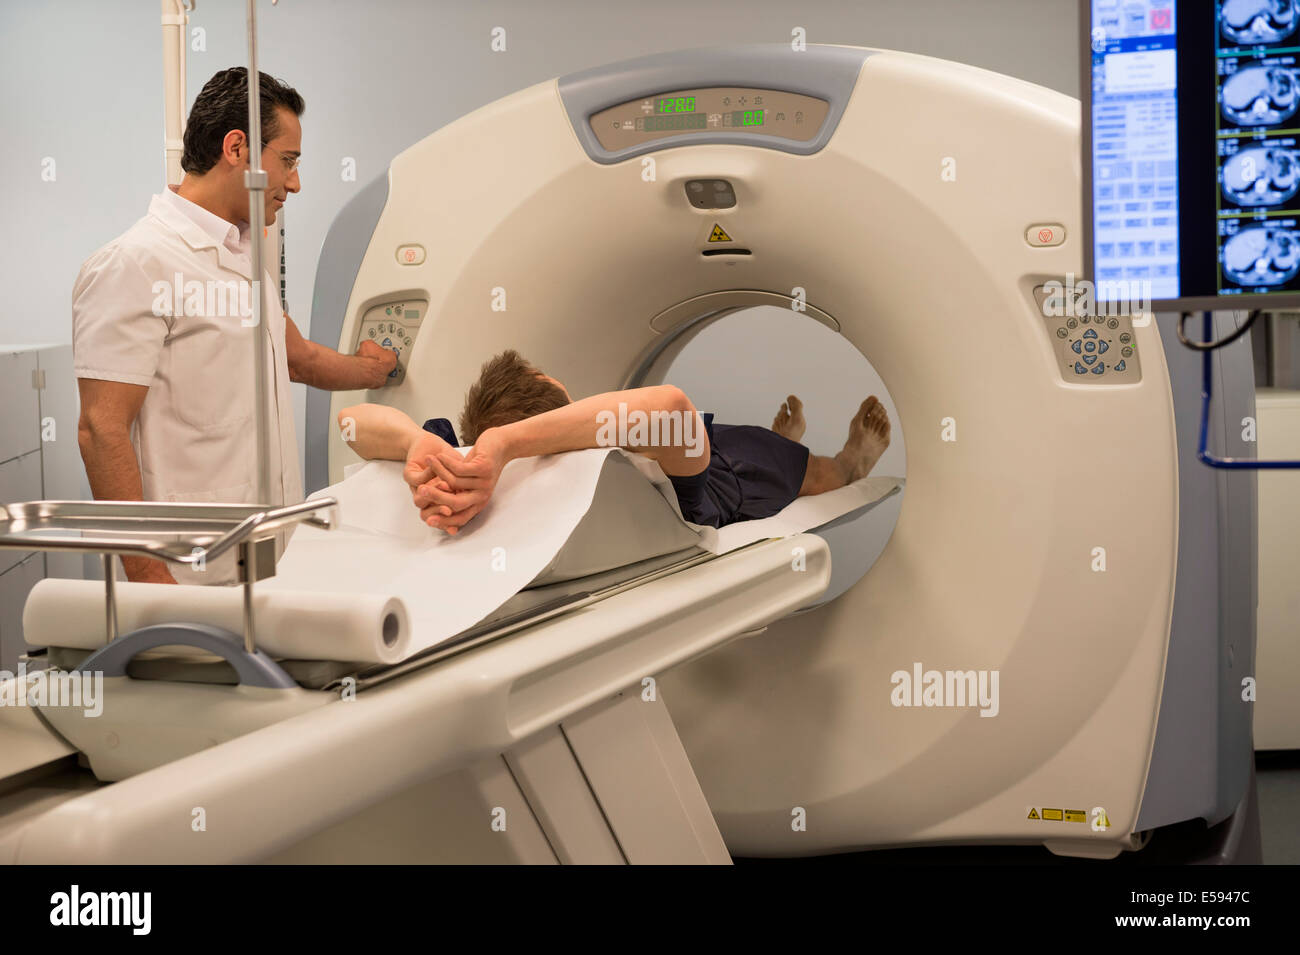 Male doctor preparing patient for MRI scan in hospital Stock Photo